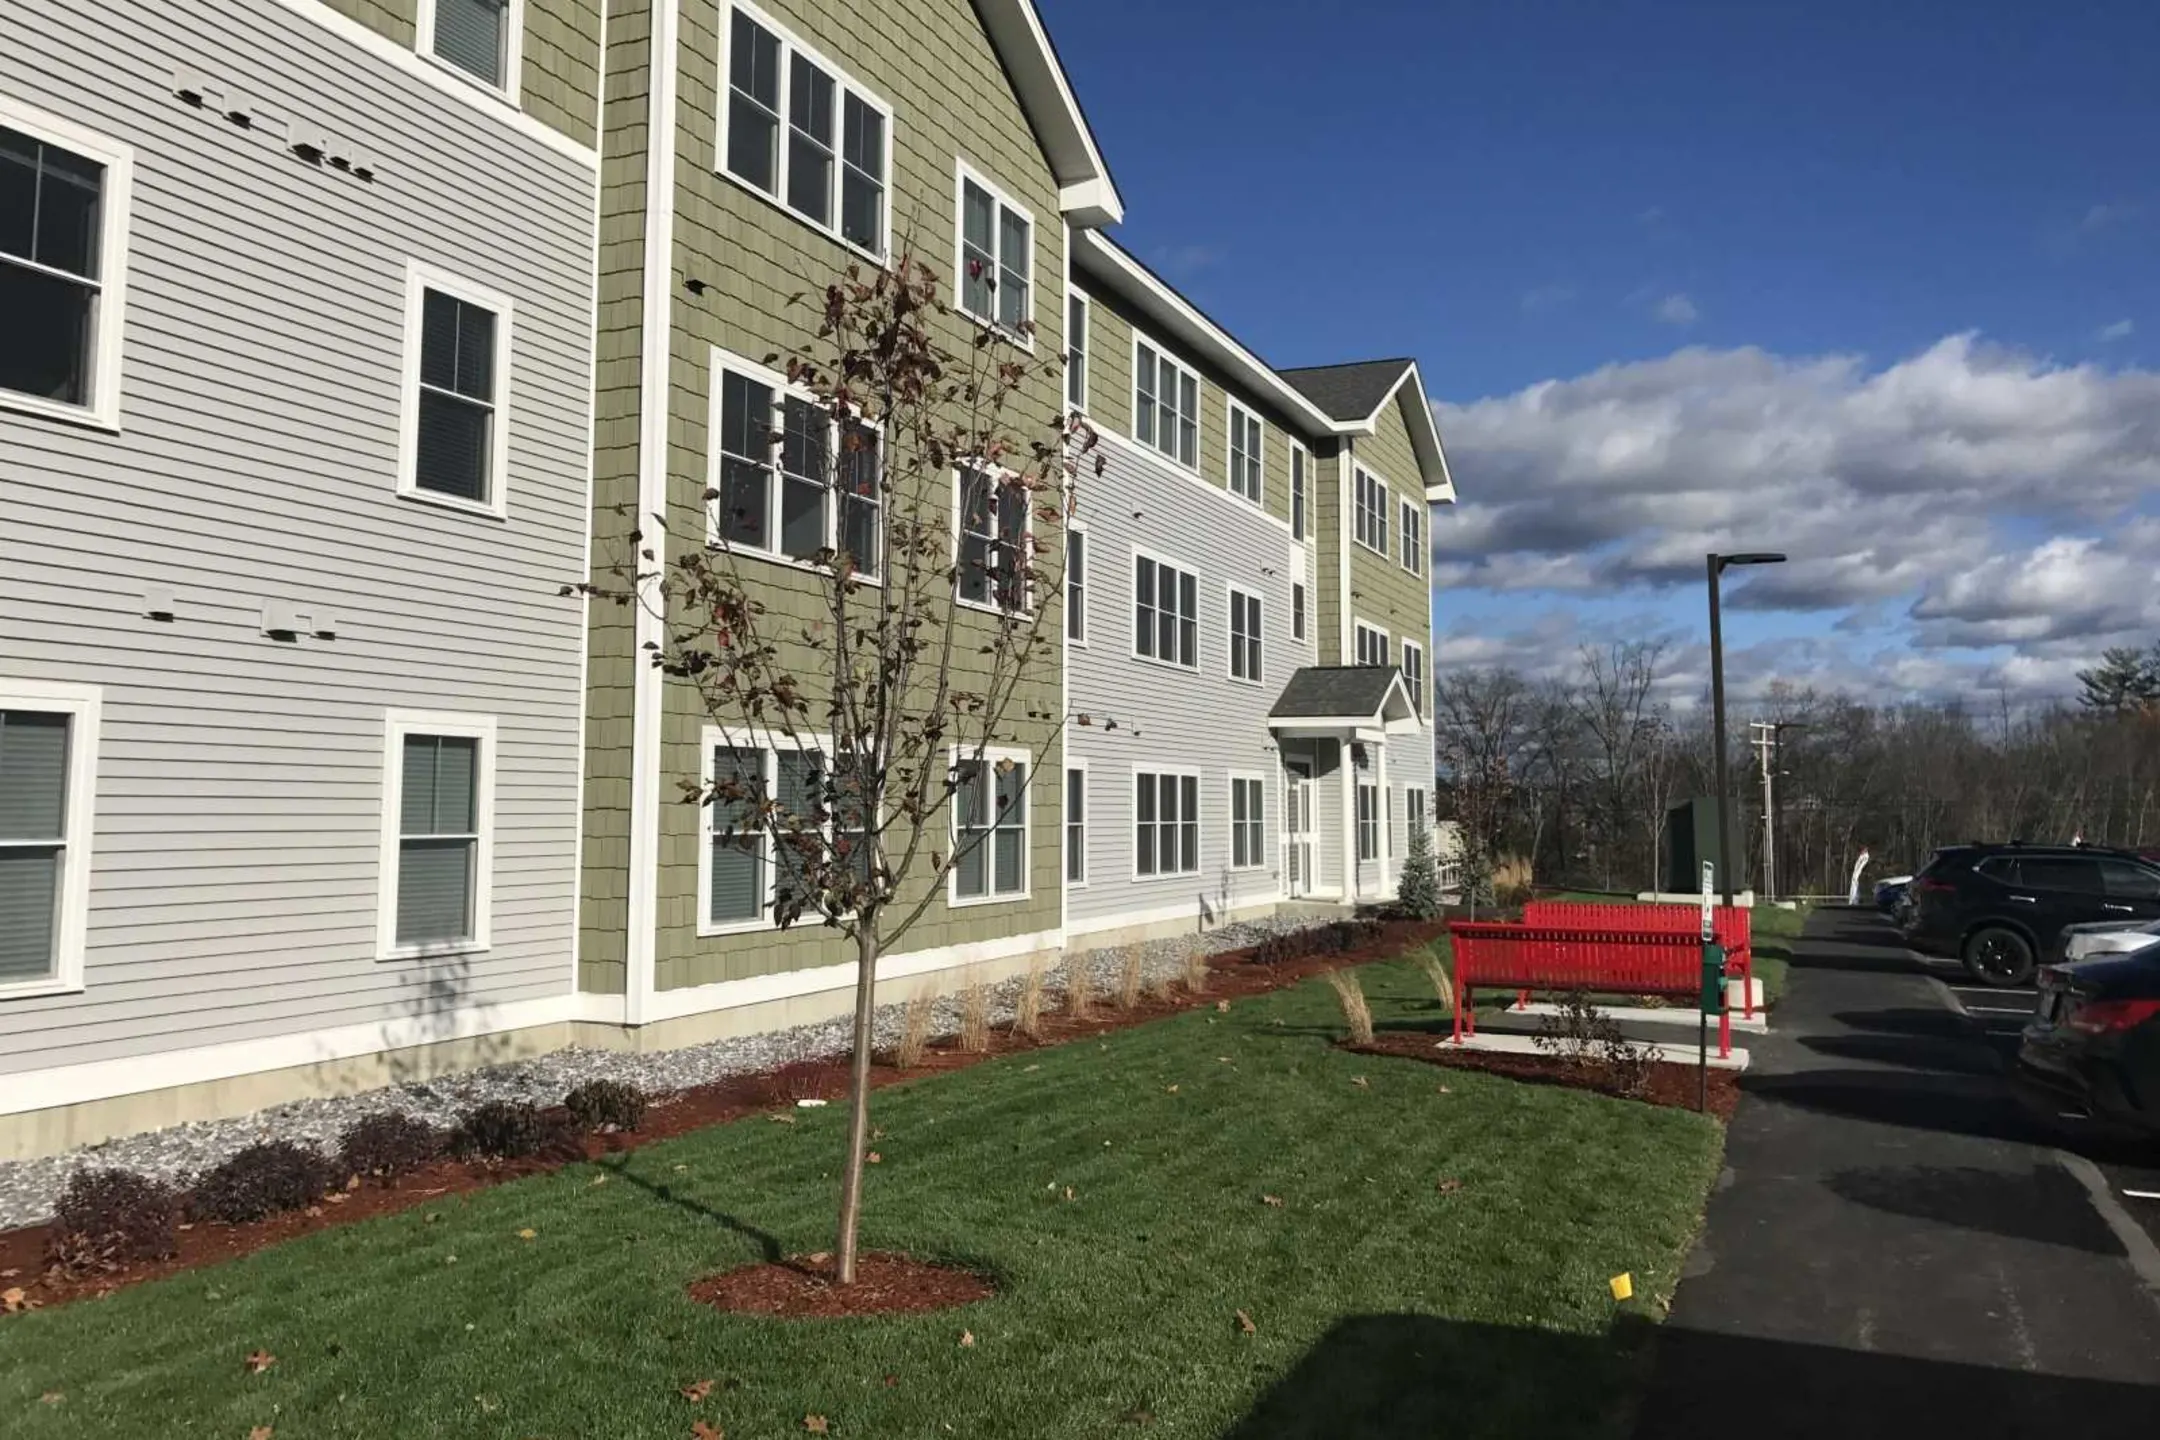 Building - The Ridge At Eastern Trails Apartments and Townhomes - Milford, NH